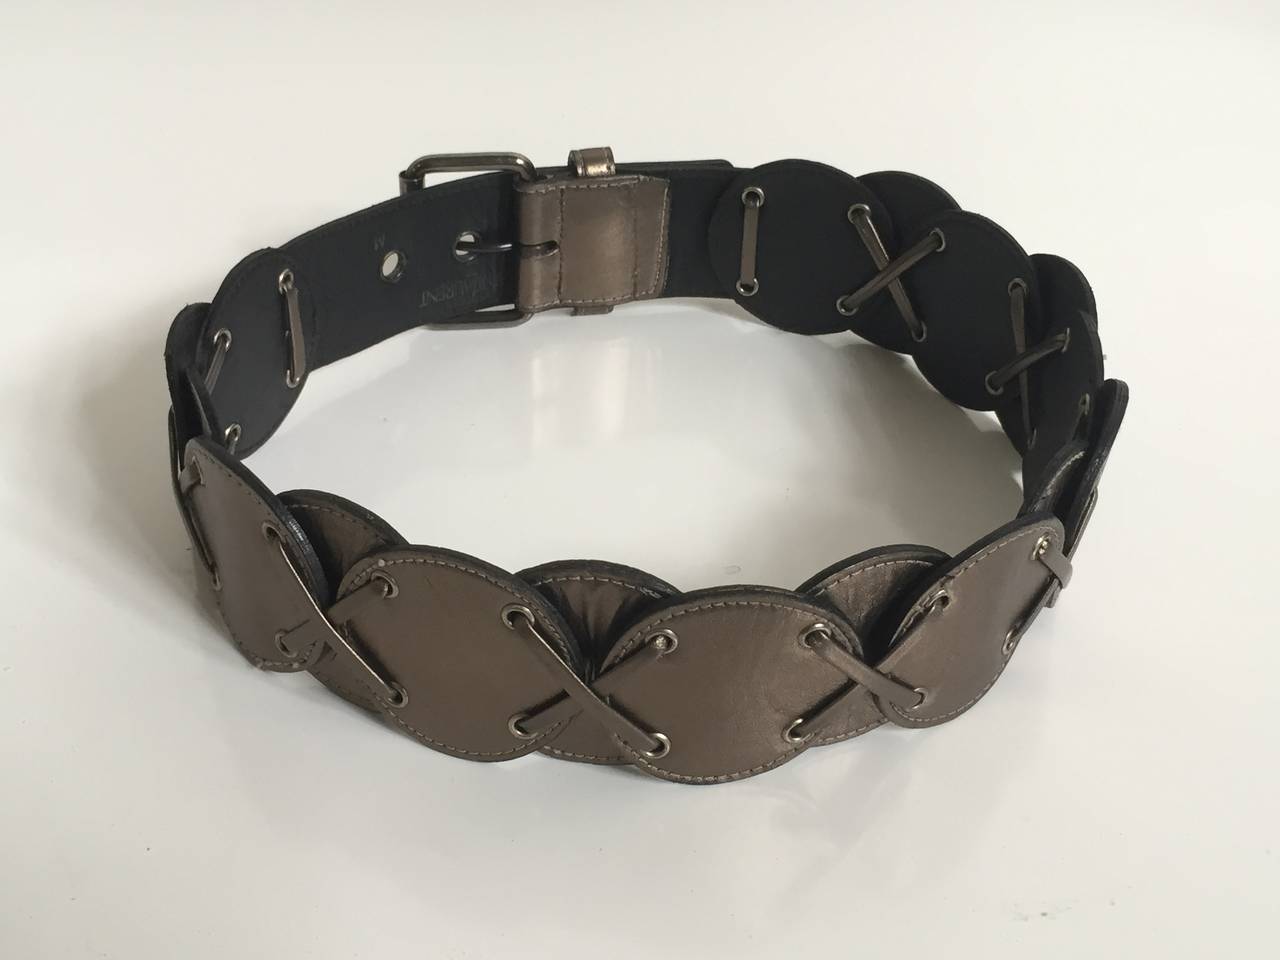 Yves Saint Laurent 1980s metallic leather belt made in France and size small.
Belt is 33